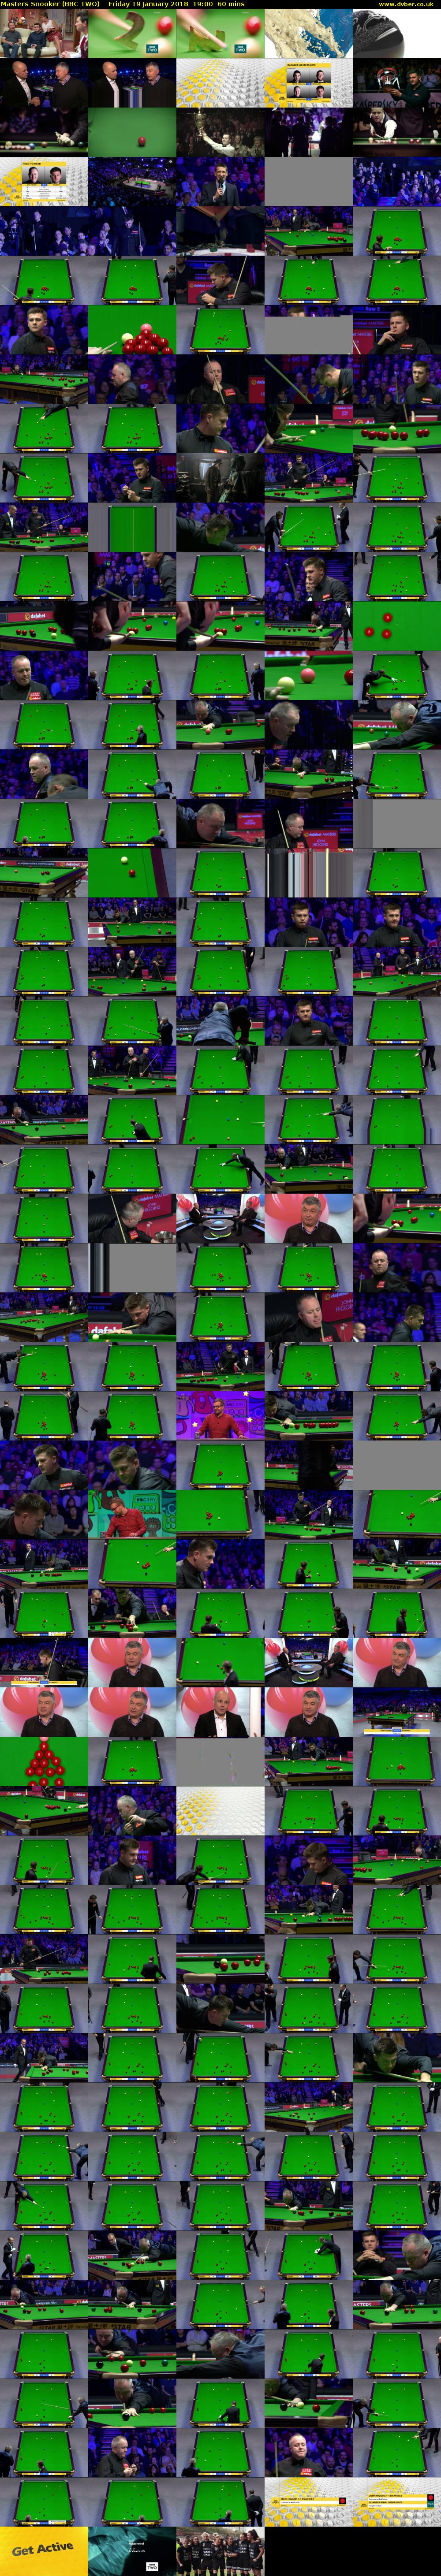 Masters Snooker (BBC TWO) Friday 19 January 2018 19:00 - 20:00